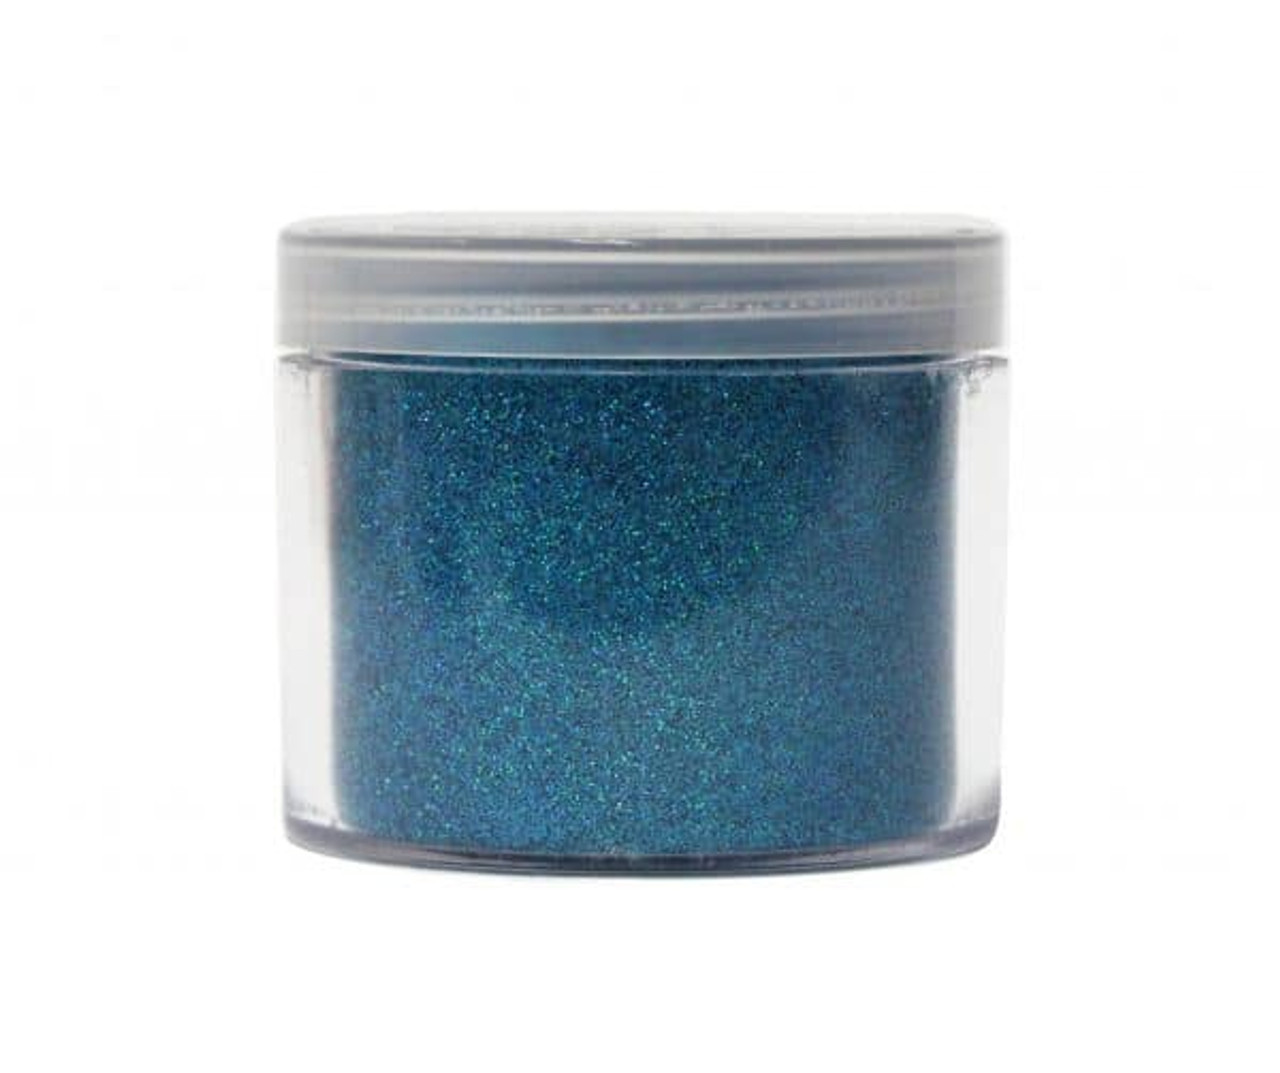 LeChat LuminEscence Hologram Glitter Color: Winter Sky (GHB02)